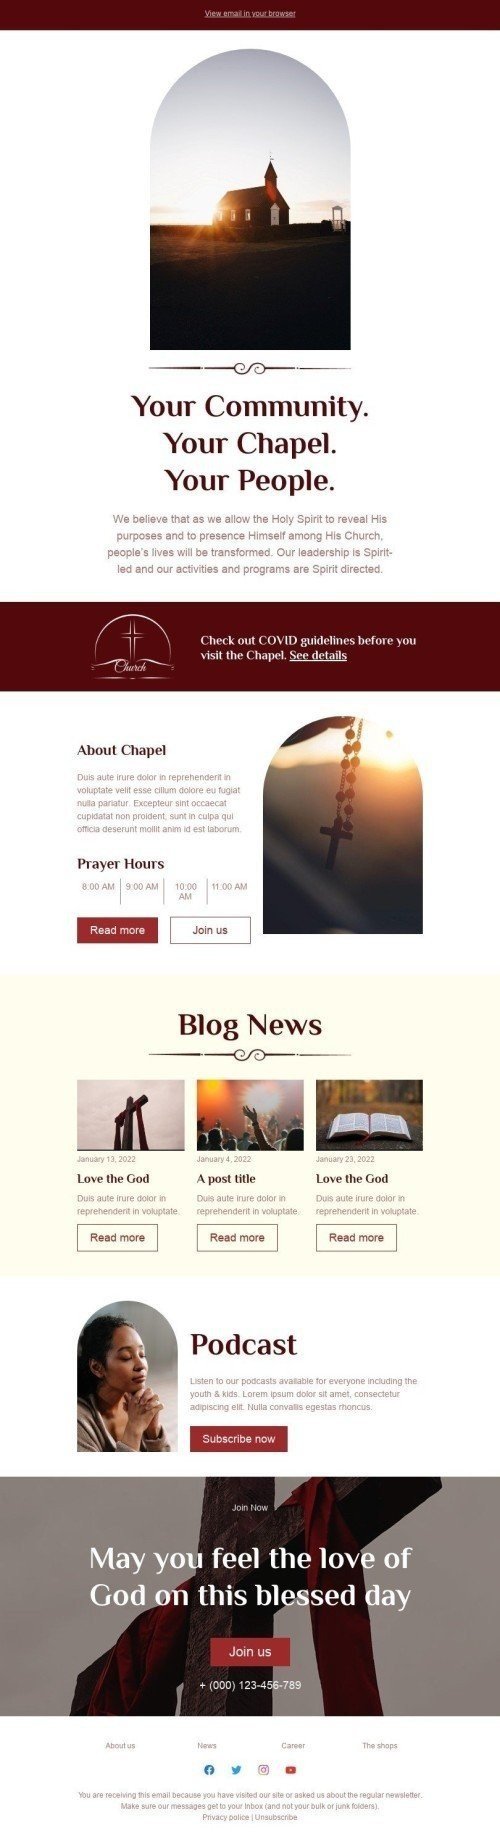 Promo Email Template "Your Chapel" for Church industry desktop view